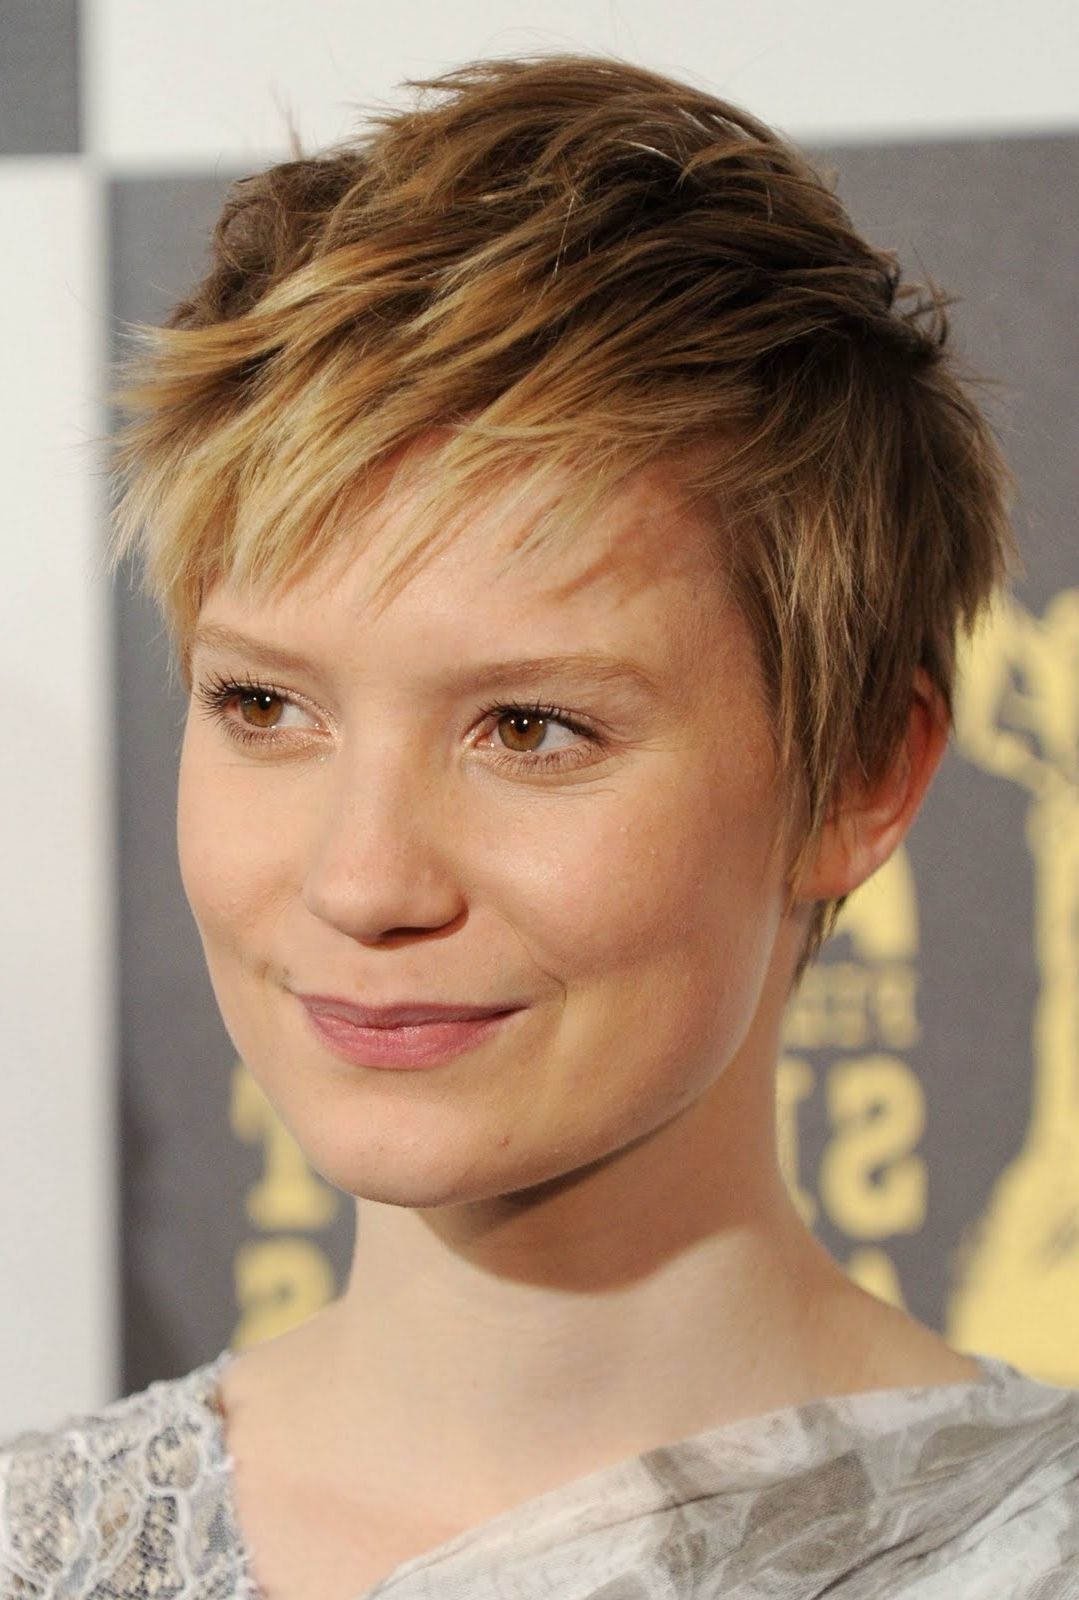 Long Straight Haircuts: Short Pixie Haircuts Are Very Stylish Within Most Current Short Straight Pixie Hairstyles (Photo 5 of 15)